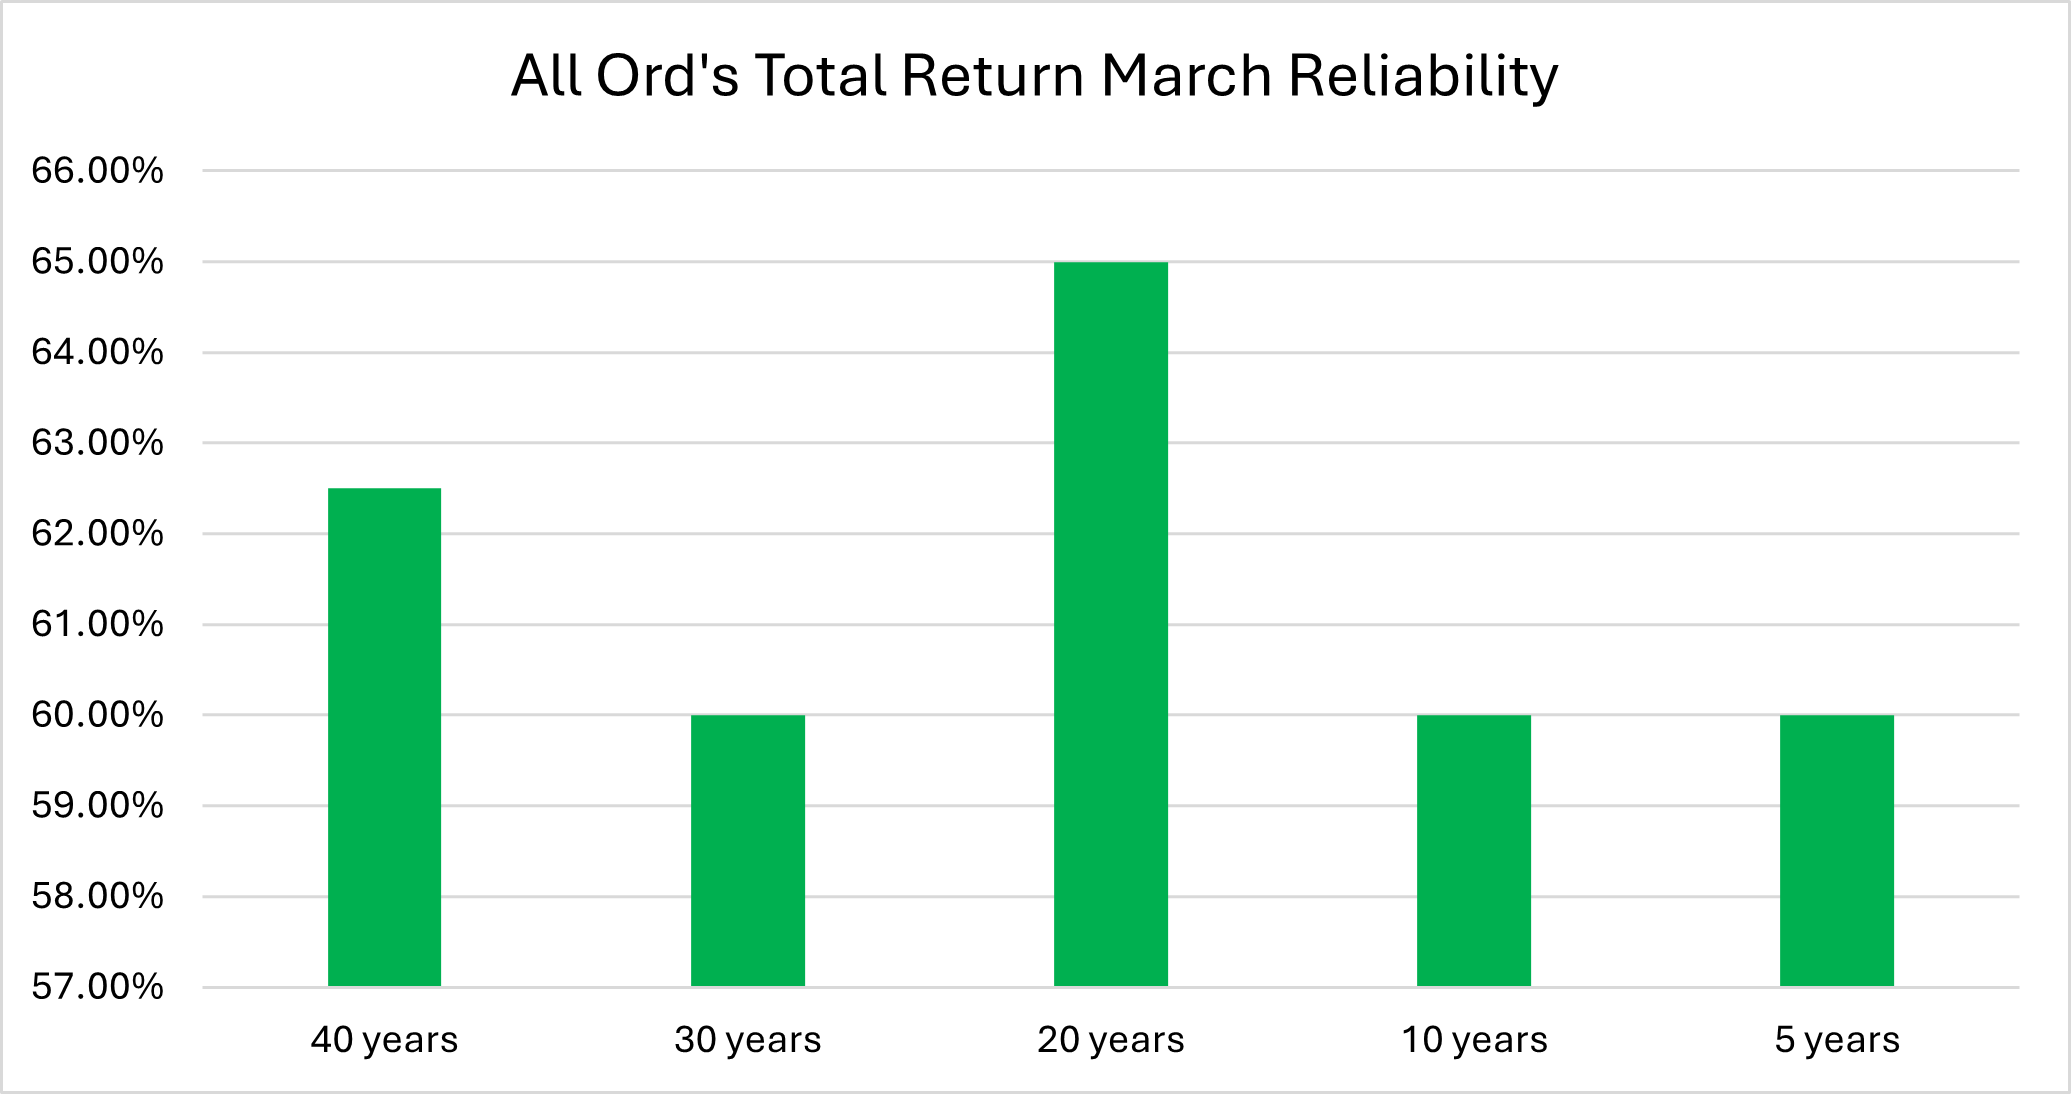 4. All Ord-s Total Return March Reliability